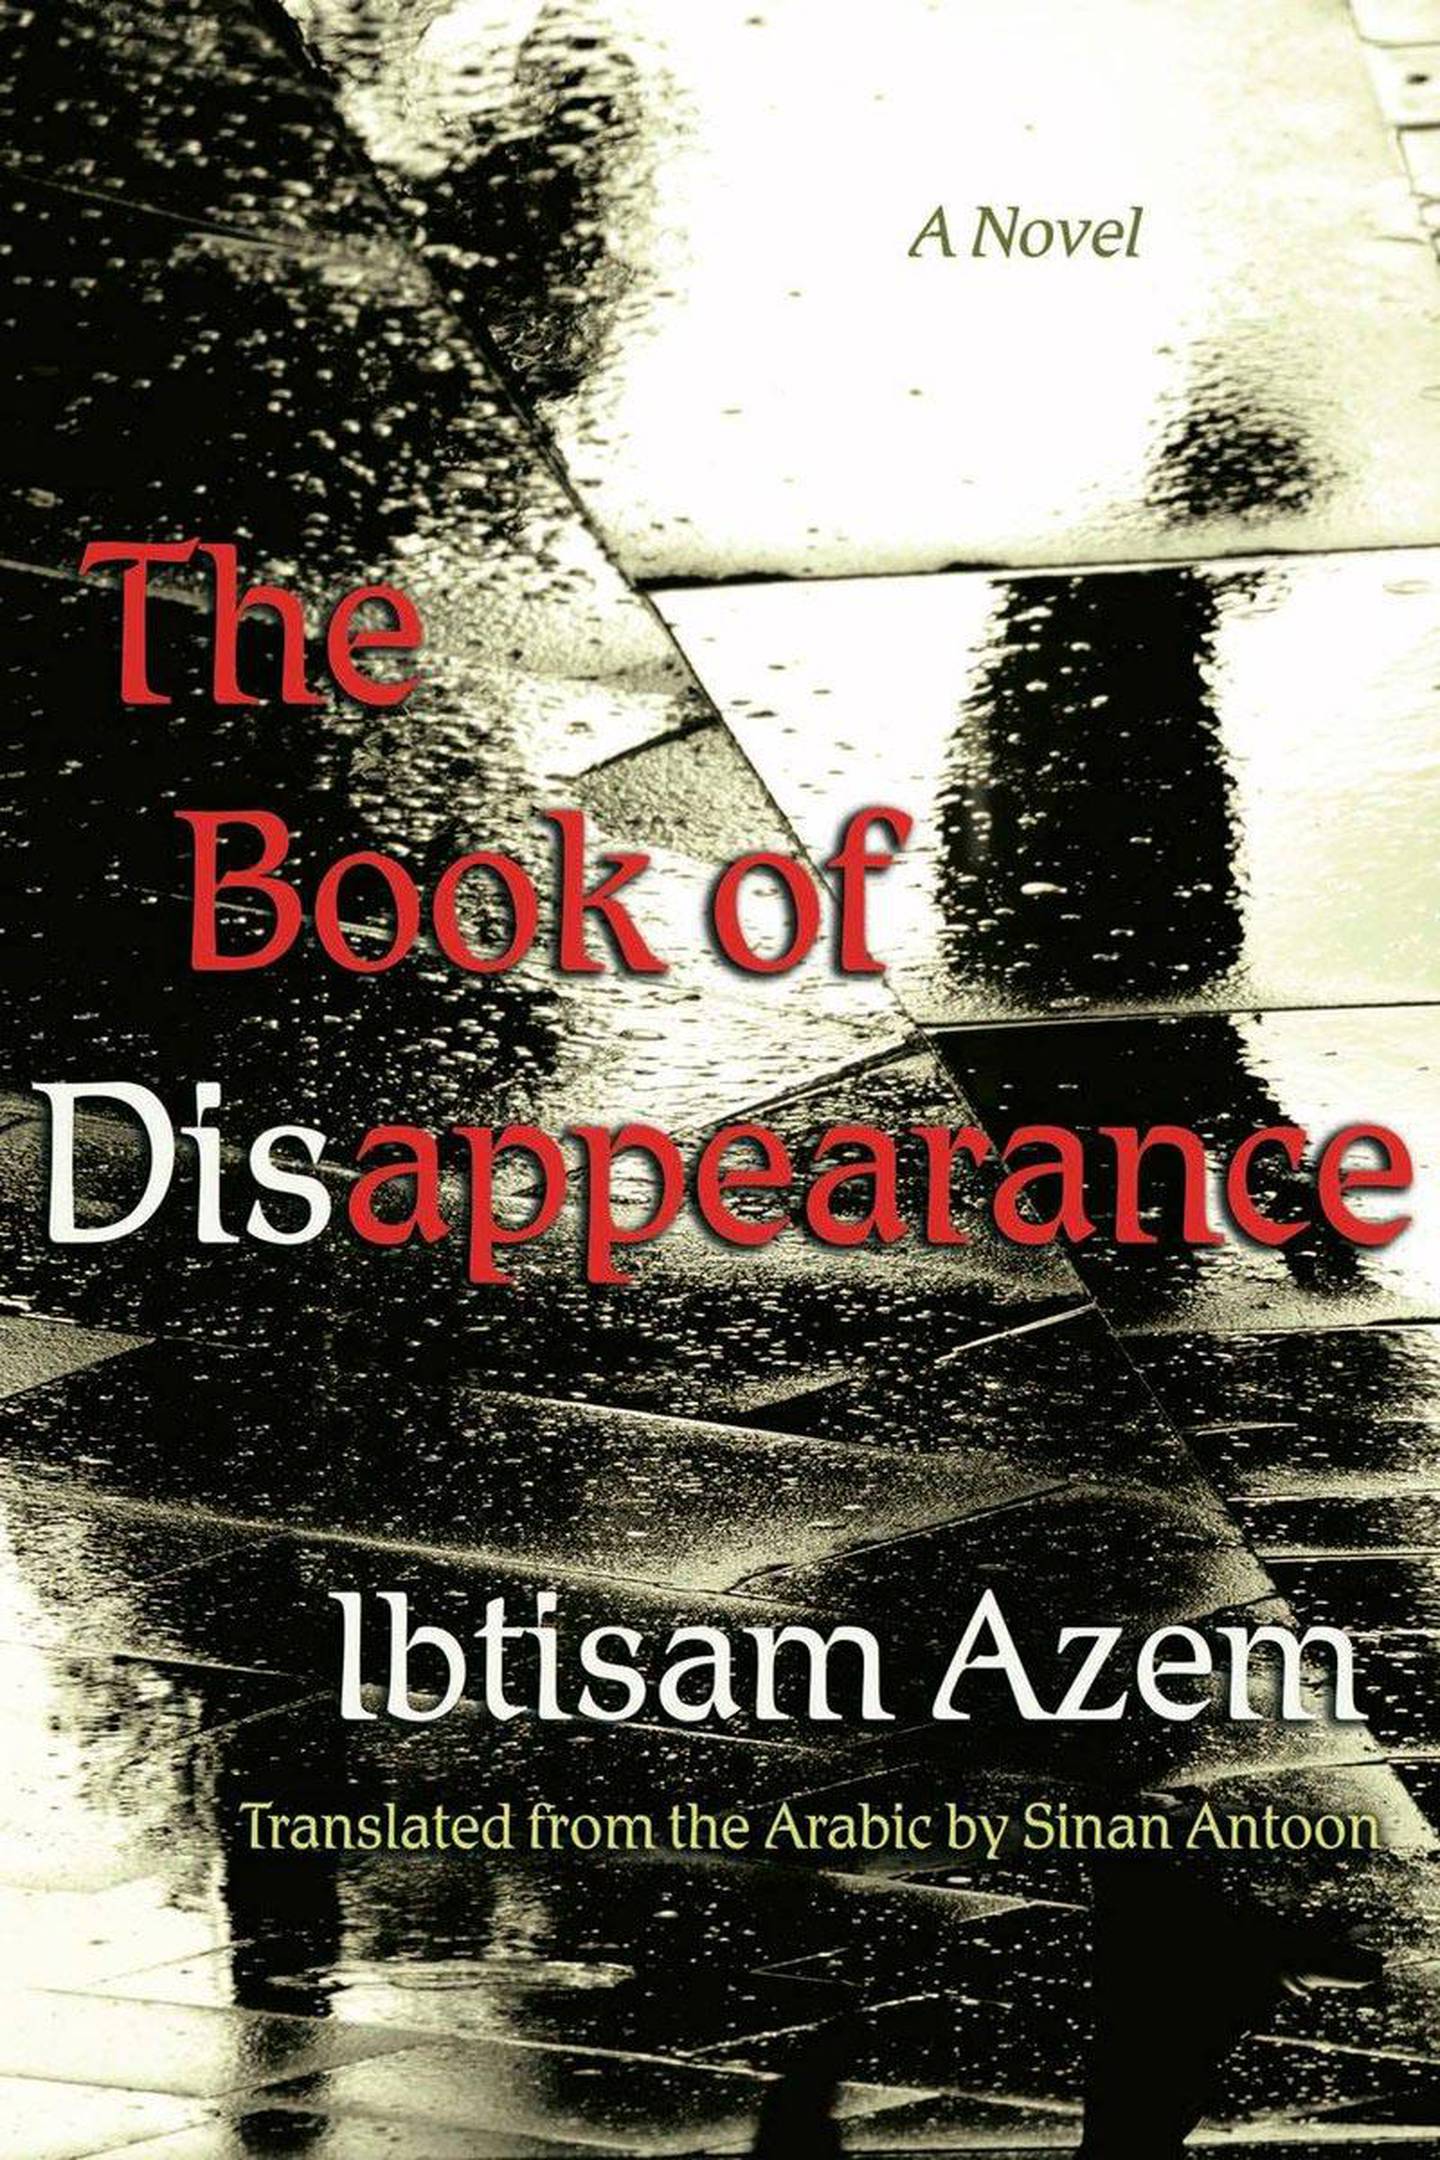 The Book of Disappearance by Ibtisam Azem, translated by Sinan Antoon. Courtesy Syracuse University Press